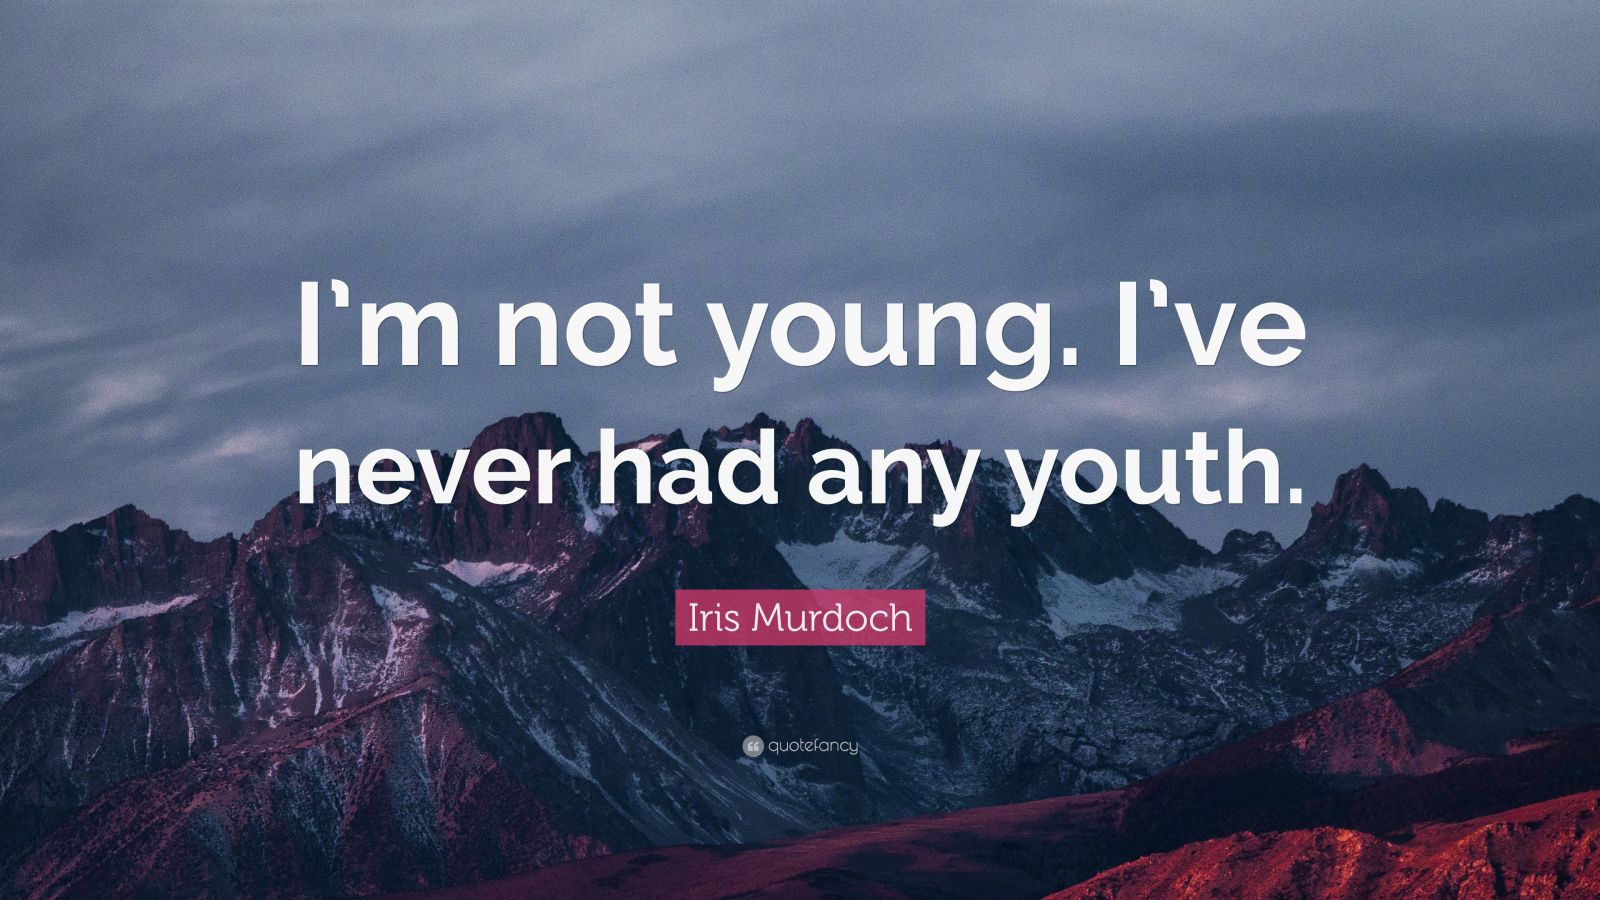 Iris Murdoch Quote “im Not Young Ive Never Had Any Youth”